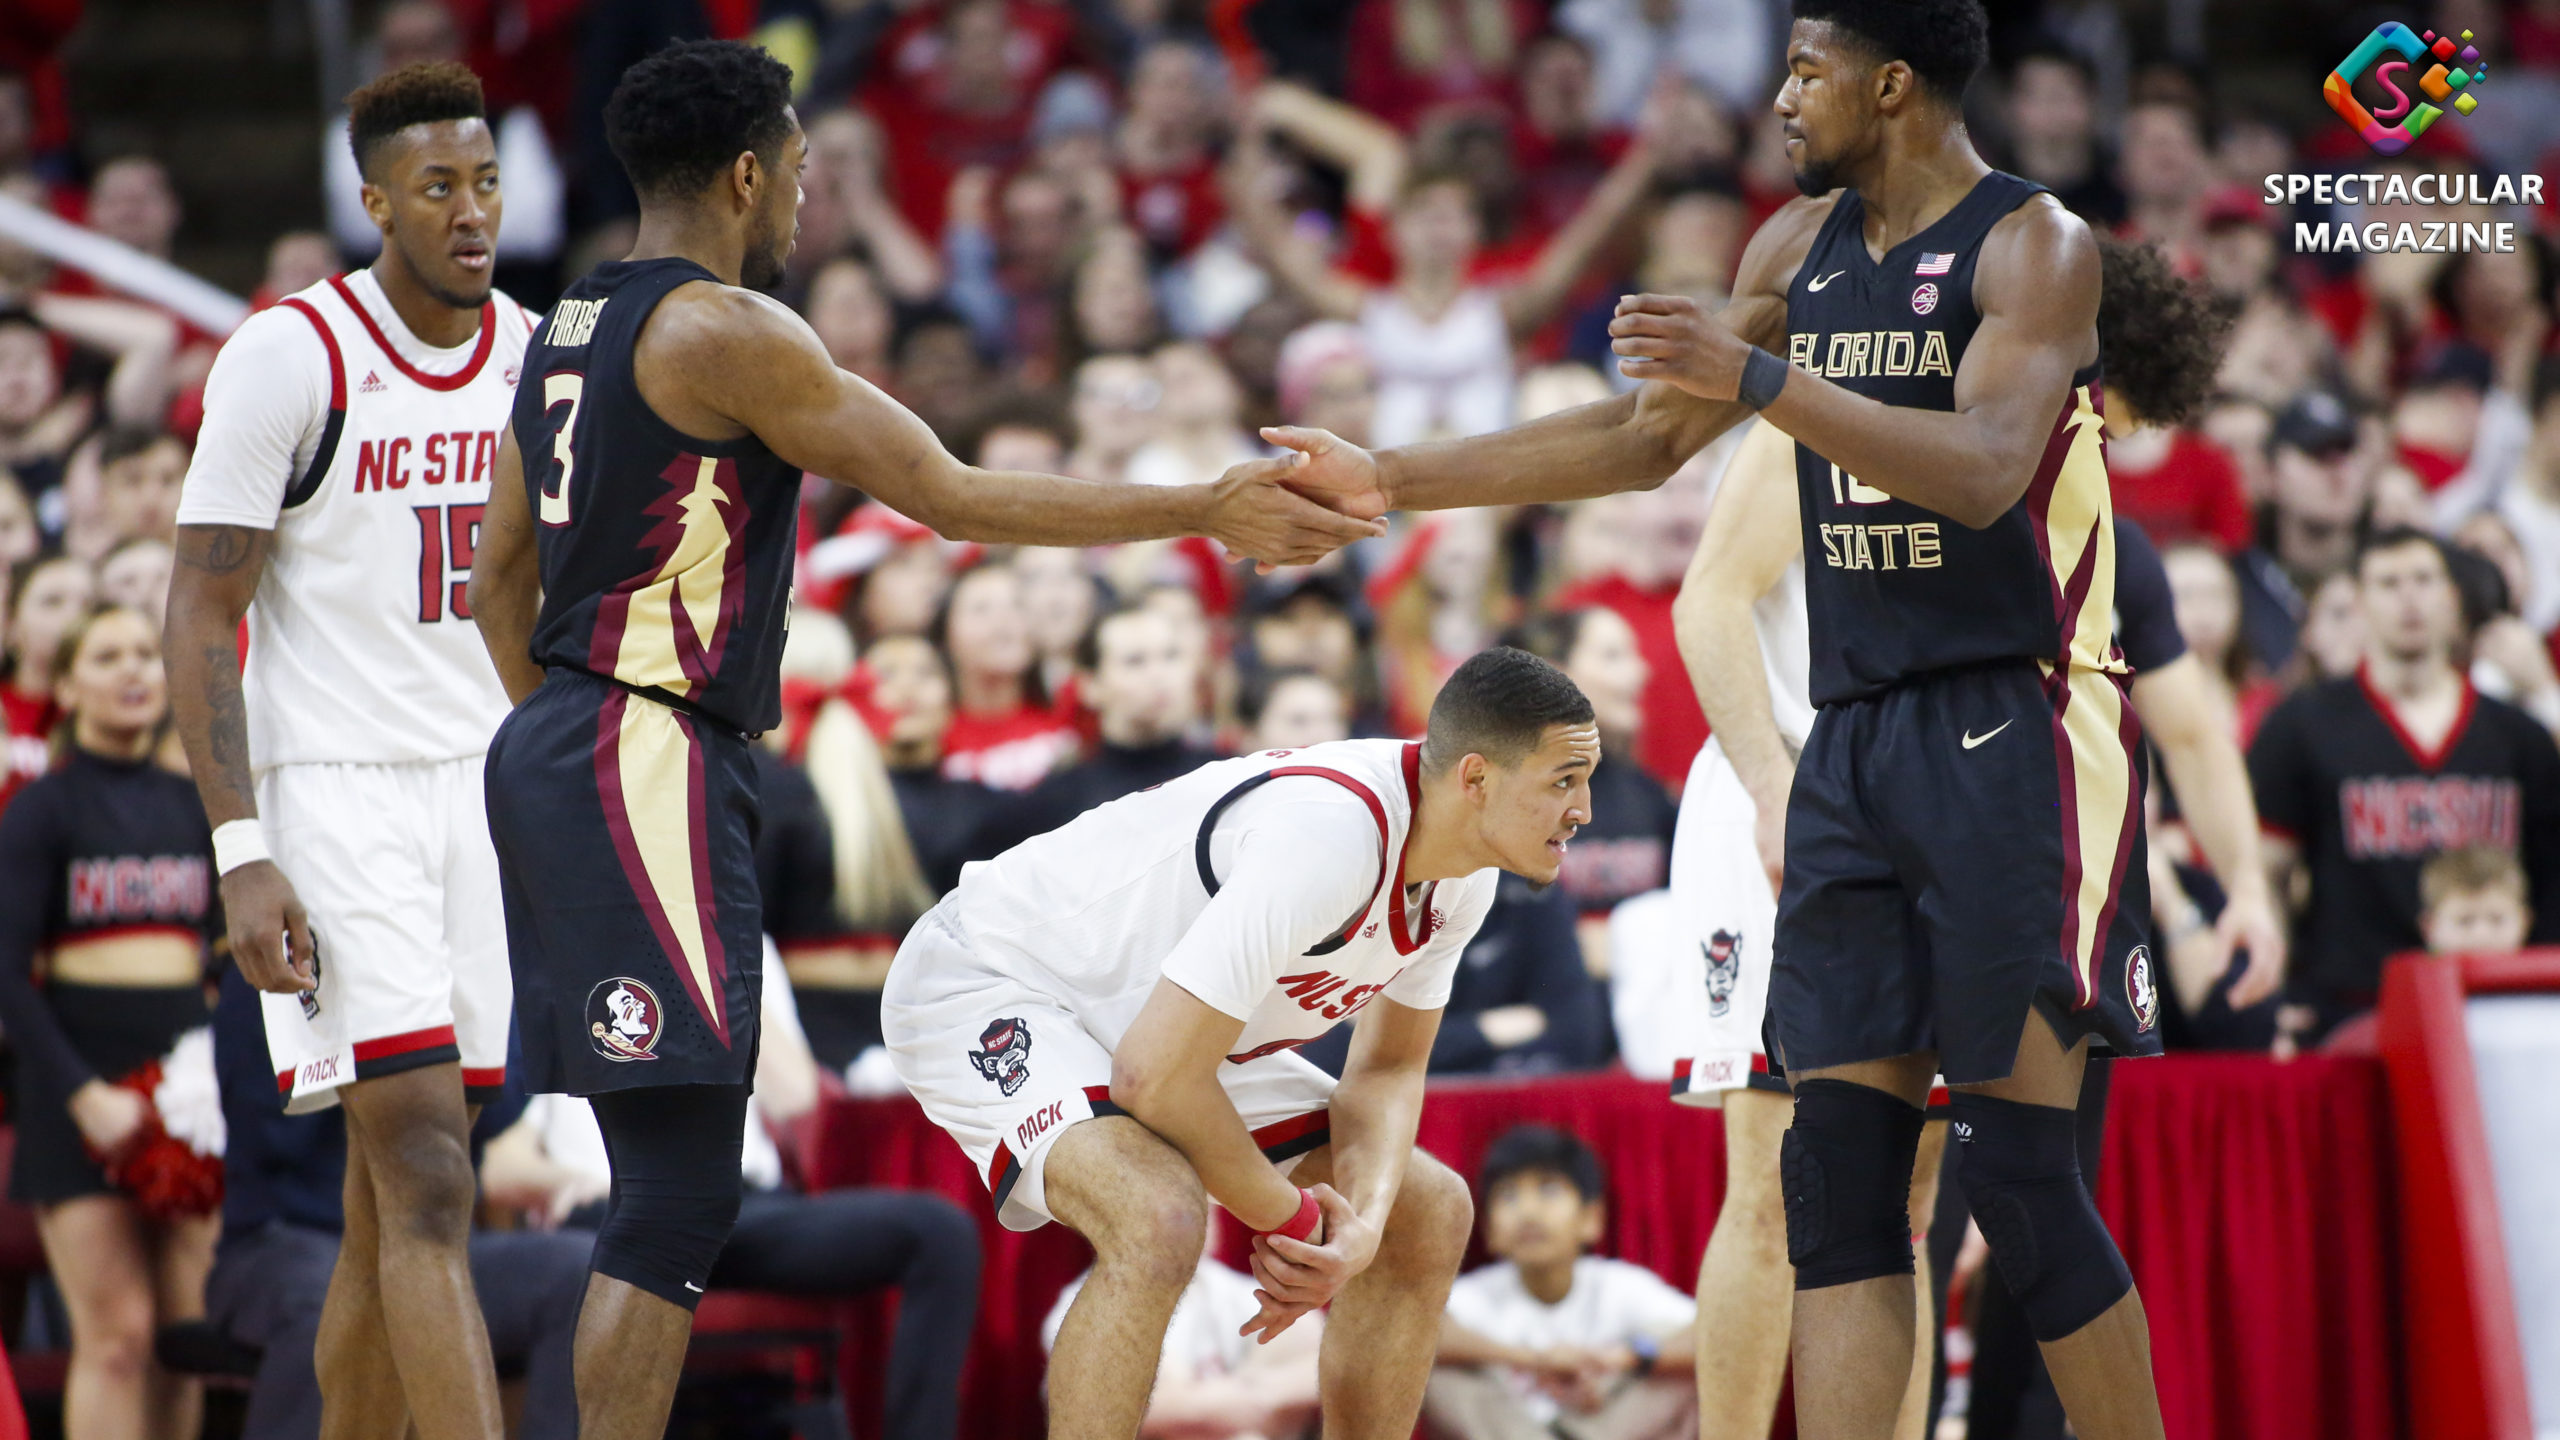 N.C. State's Jericole Hellems reacts after a call in the second half against Florida State at PNC Arena in Raleigh, N.C., Saturday, Feb. 22, 2020. FSU defeated NCSU 67-61.